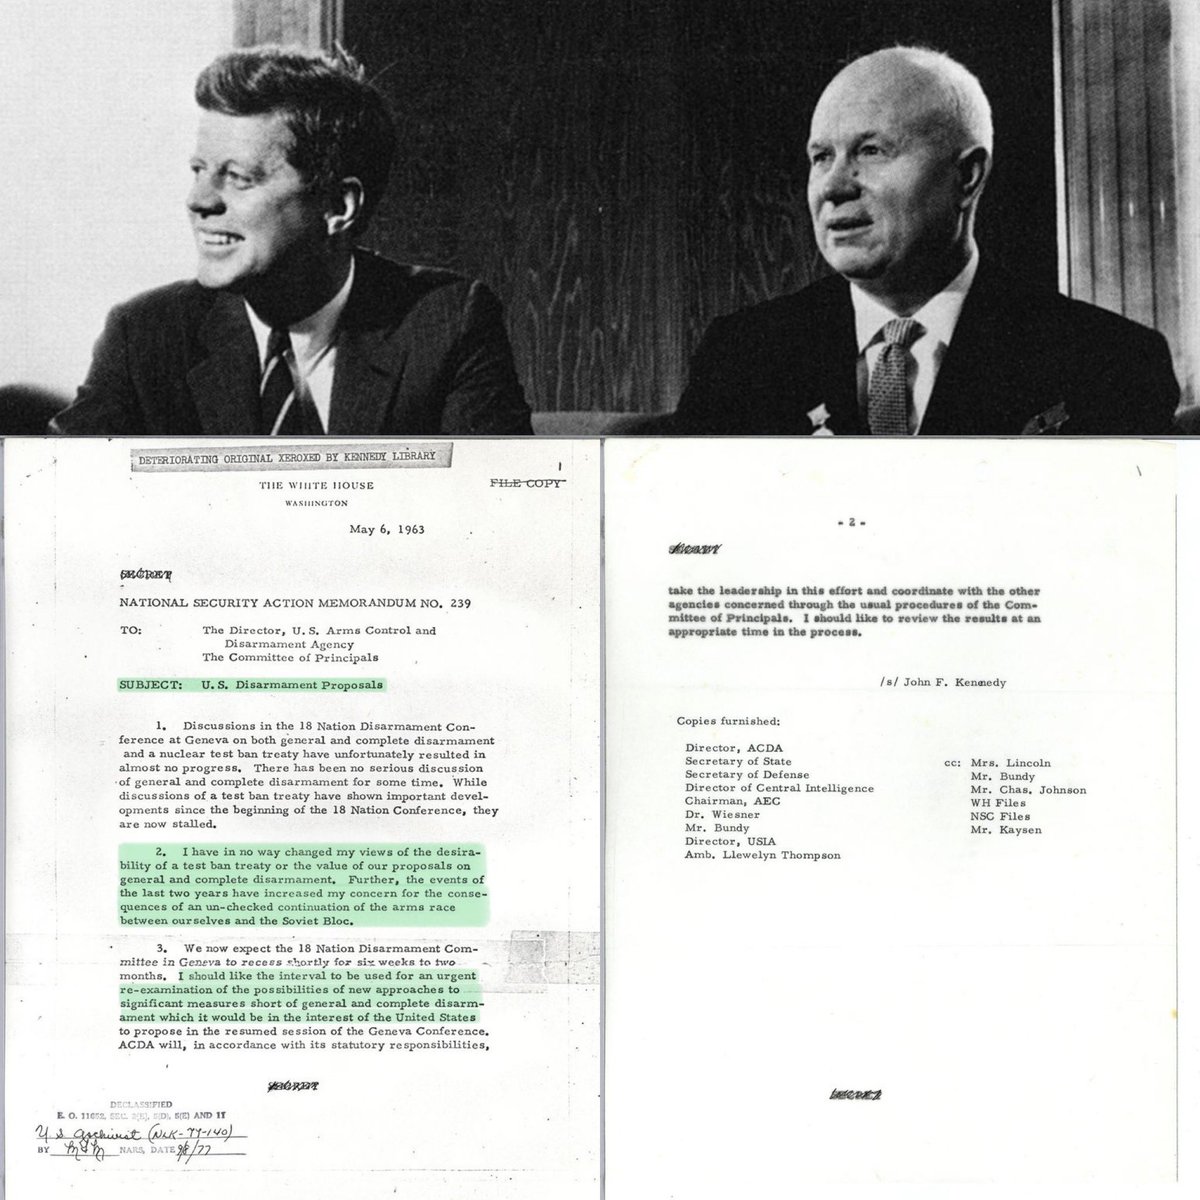 As part of his strategy for peace and bringing an end to the Cold War, JFK issues NSAM 239 in May 1963 around U.S. disarmament proposals: '𝐈 𝐡𝐚𝐯𝐞 𝐢𝐧 𝐧𝐨 𝐰𝐚𝐲 𝐜𝐡𝐚𝐧𝐠𝐞𝐝 𝐦𝐲 𝐯𝐢𝐞𝐰𝐬 𝐨𝐟 𝐭𝐡𝐞 𝐝𝐞𝐬𝐢𝐫𝐚𝐛𝐢𝐥𝐢𝐭𝐲 𝐨𝐟 𝐚 𝐭𝐞𝐬𝐭 𝐛𝐚𝐧 𝐭𝐫𝐞𝐚𝐭𝐲 𝐨𝐫